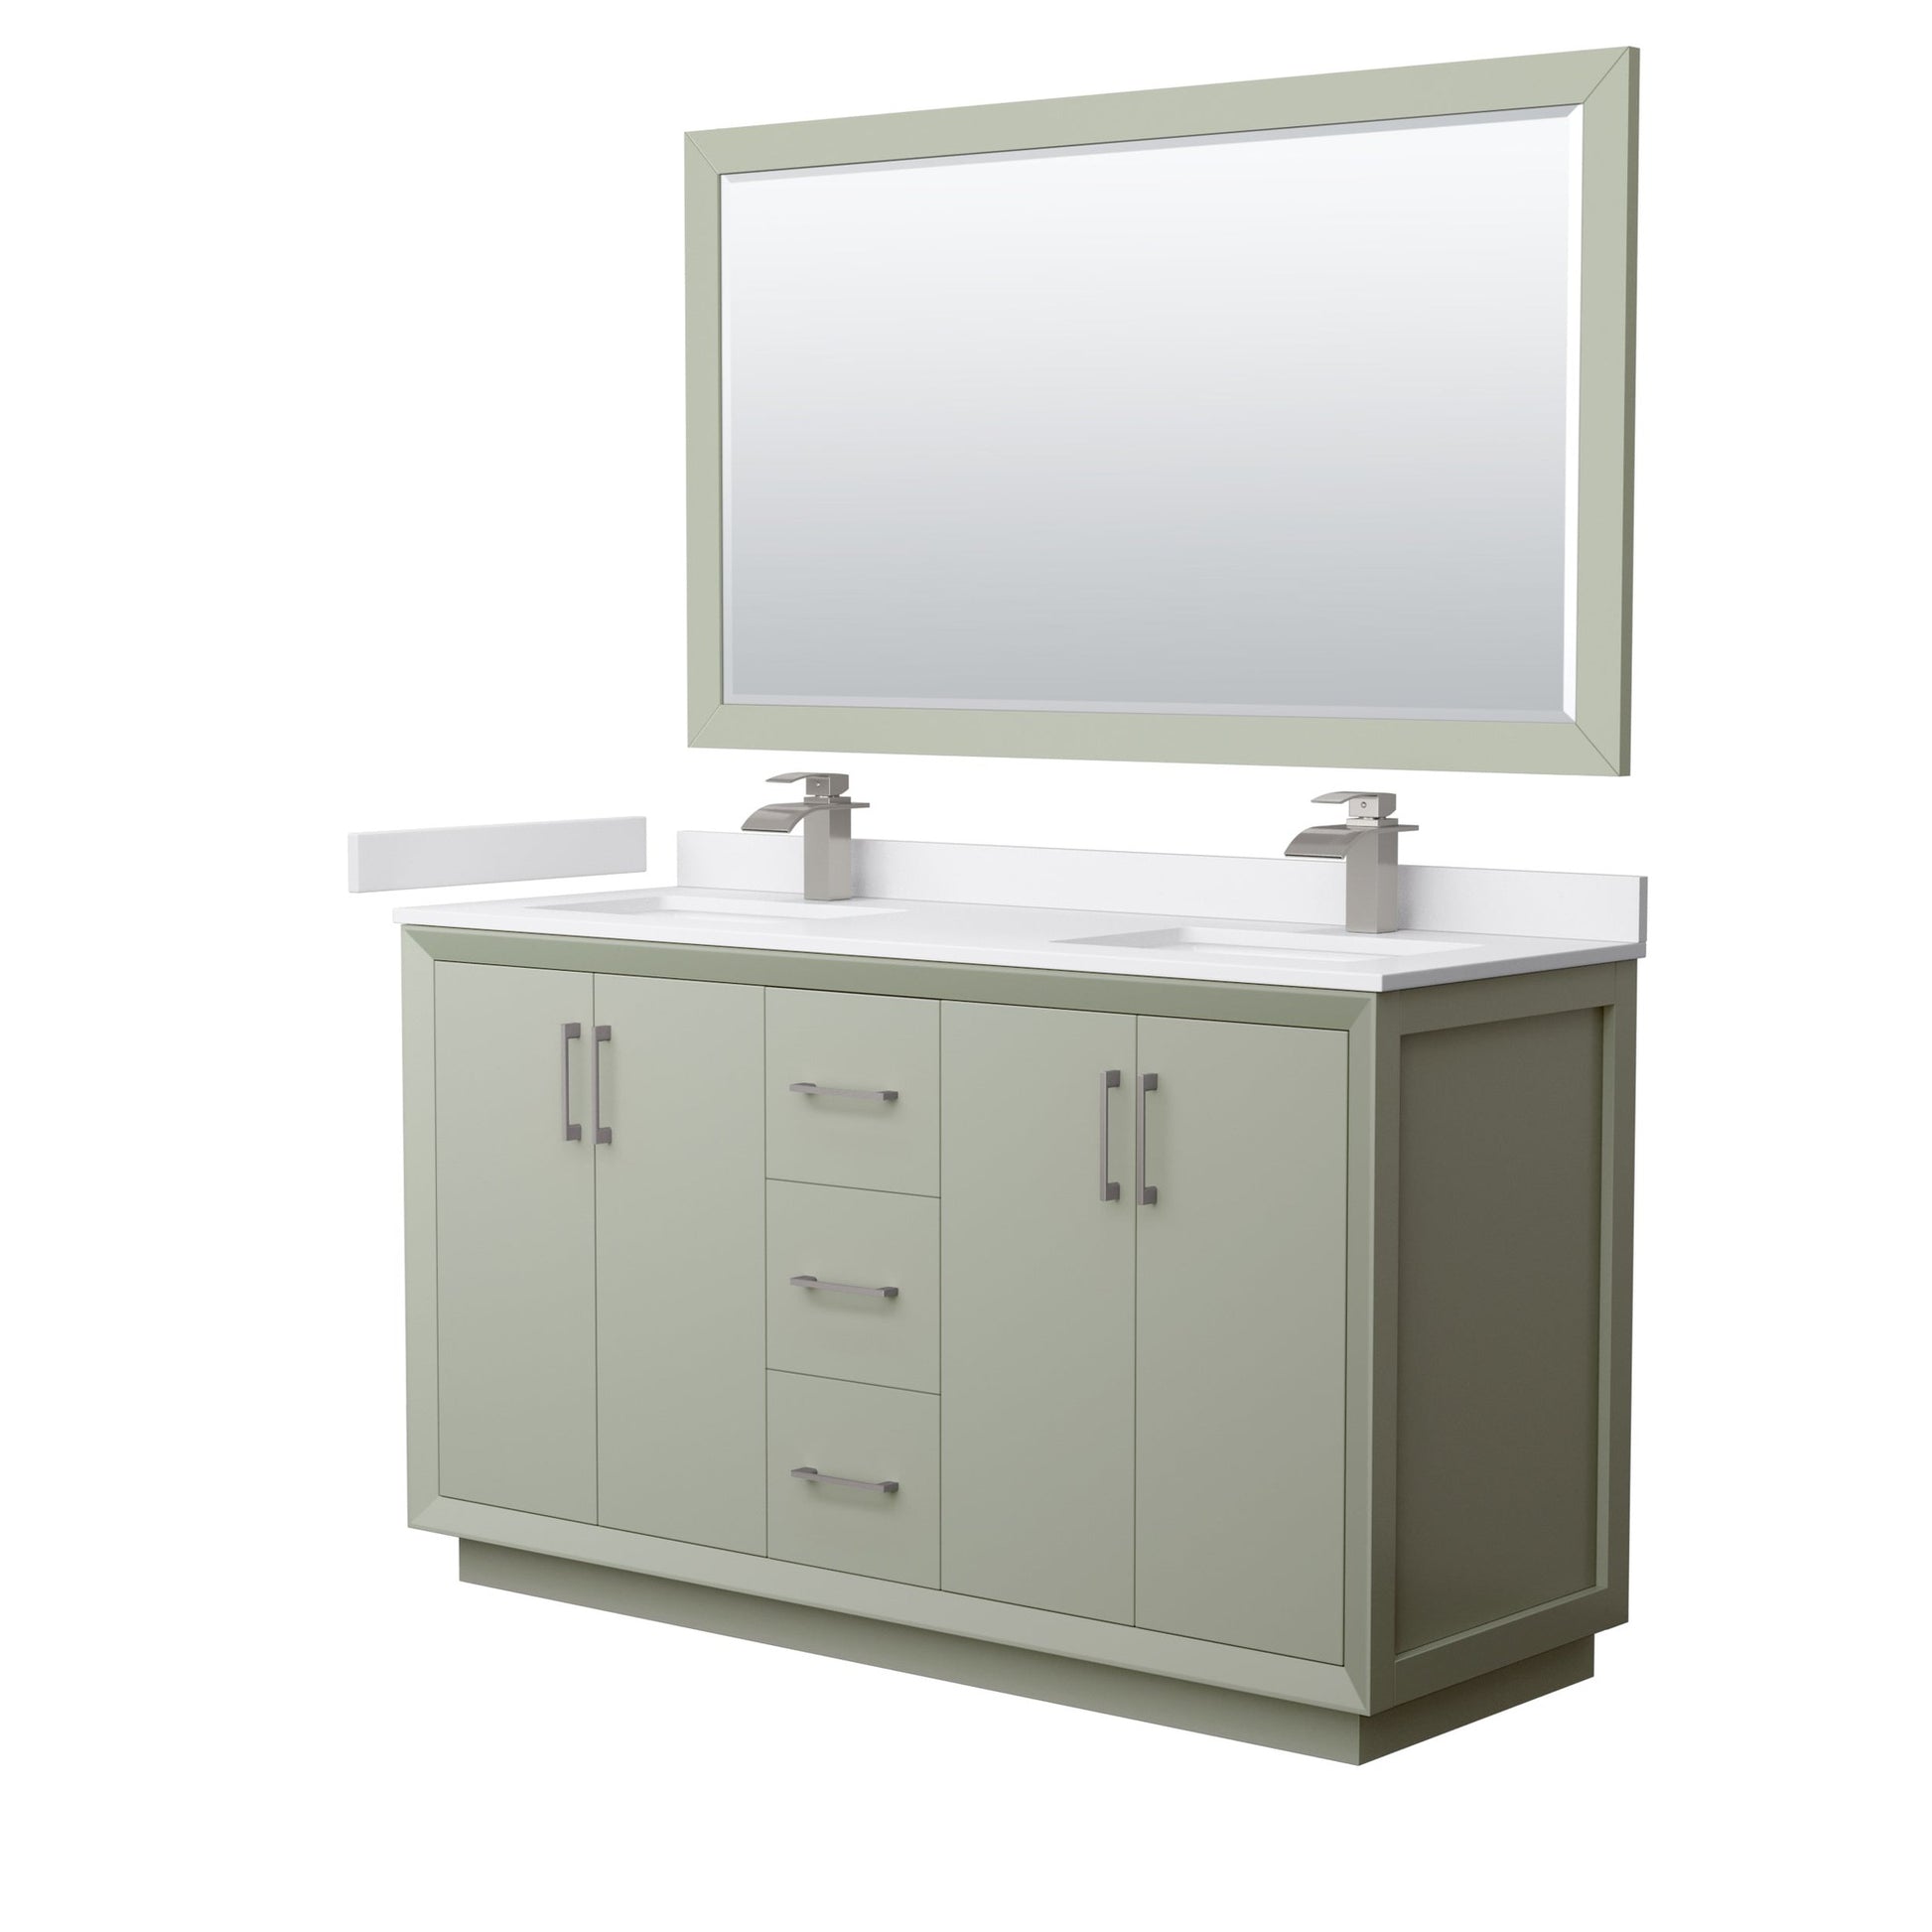 Wyndham Collection Strada 60" Double Bathroom Vanity in Light Green, White Cultured Marble Countertop, Undermount Square Sinks, Brushed Nickel Trim, 58" Mirror